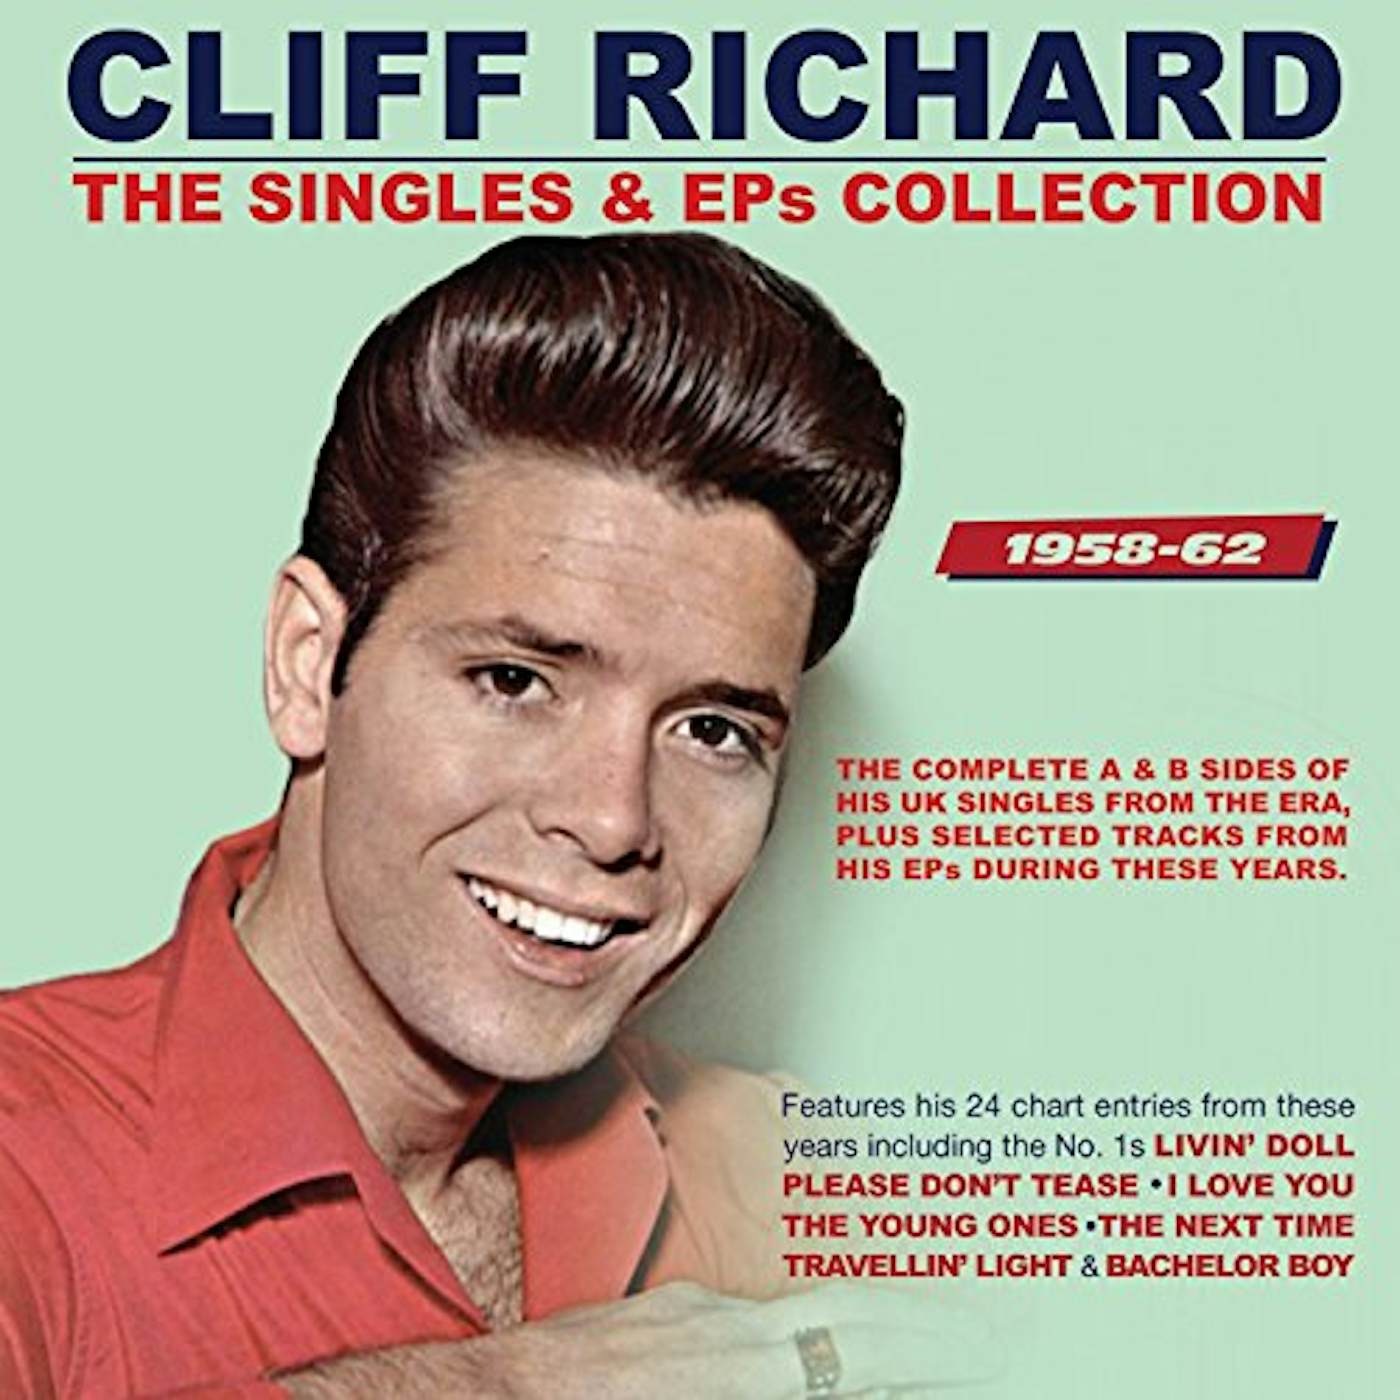 Cliff Richard SINGLES & EPS COLLECTION 1958-62 CD